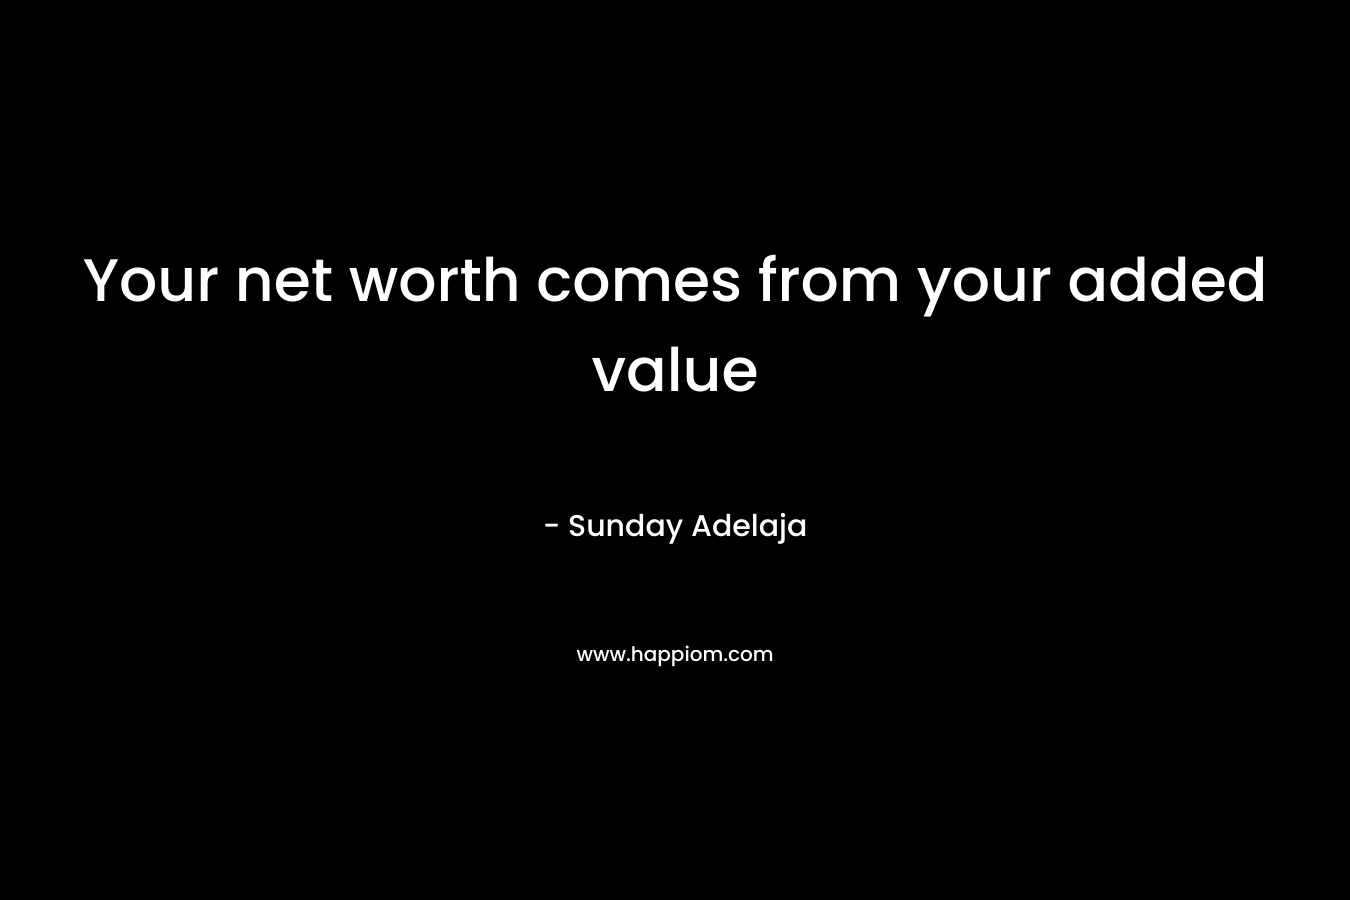 Your net worth comes from your added value